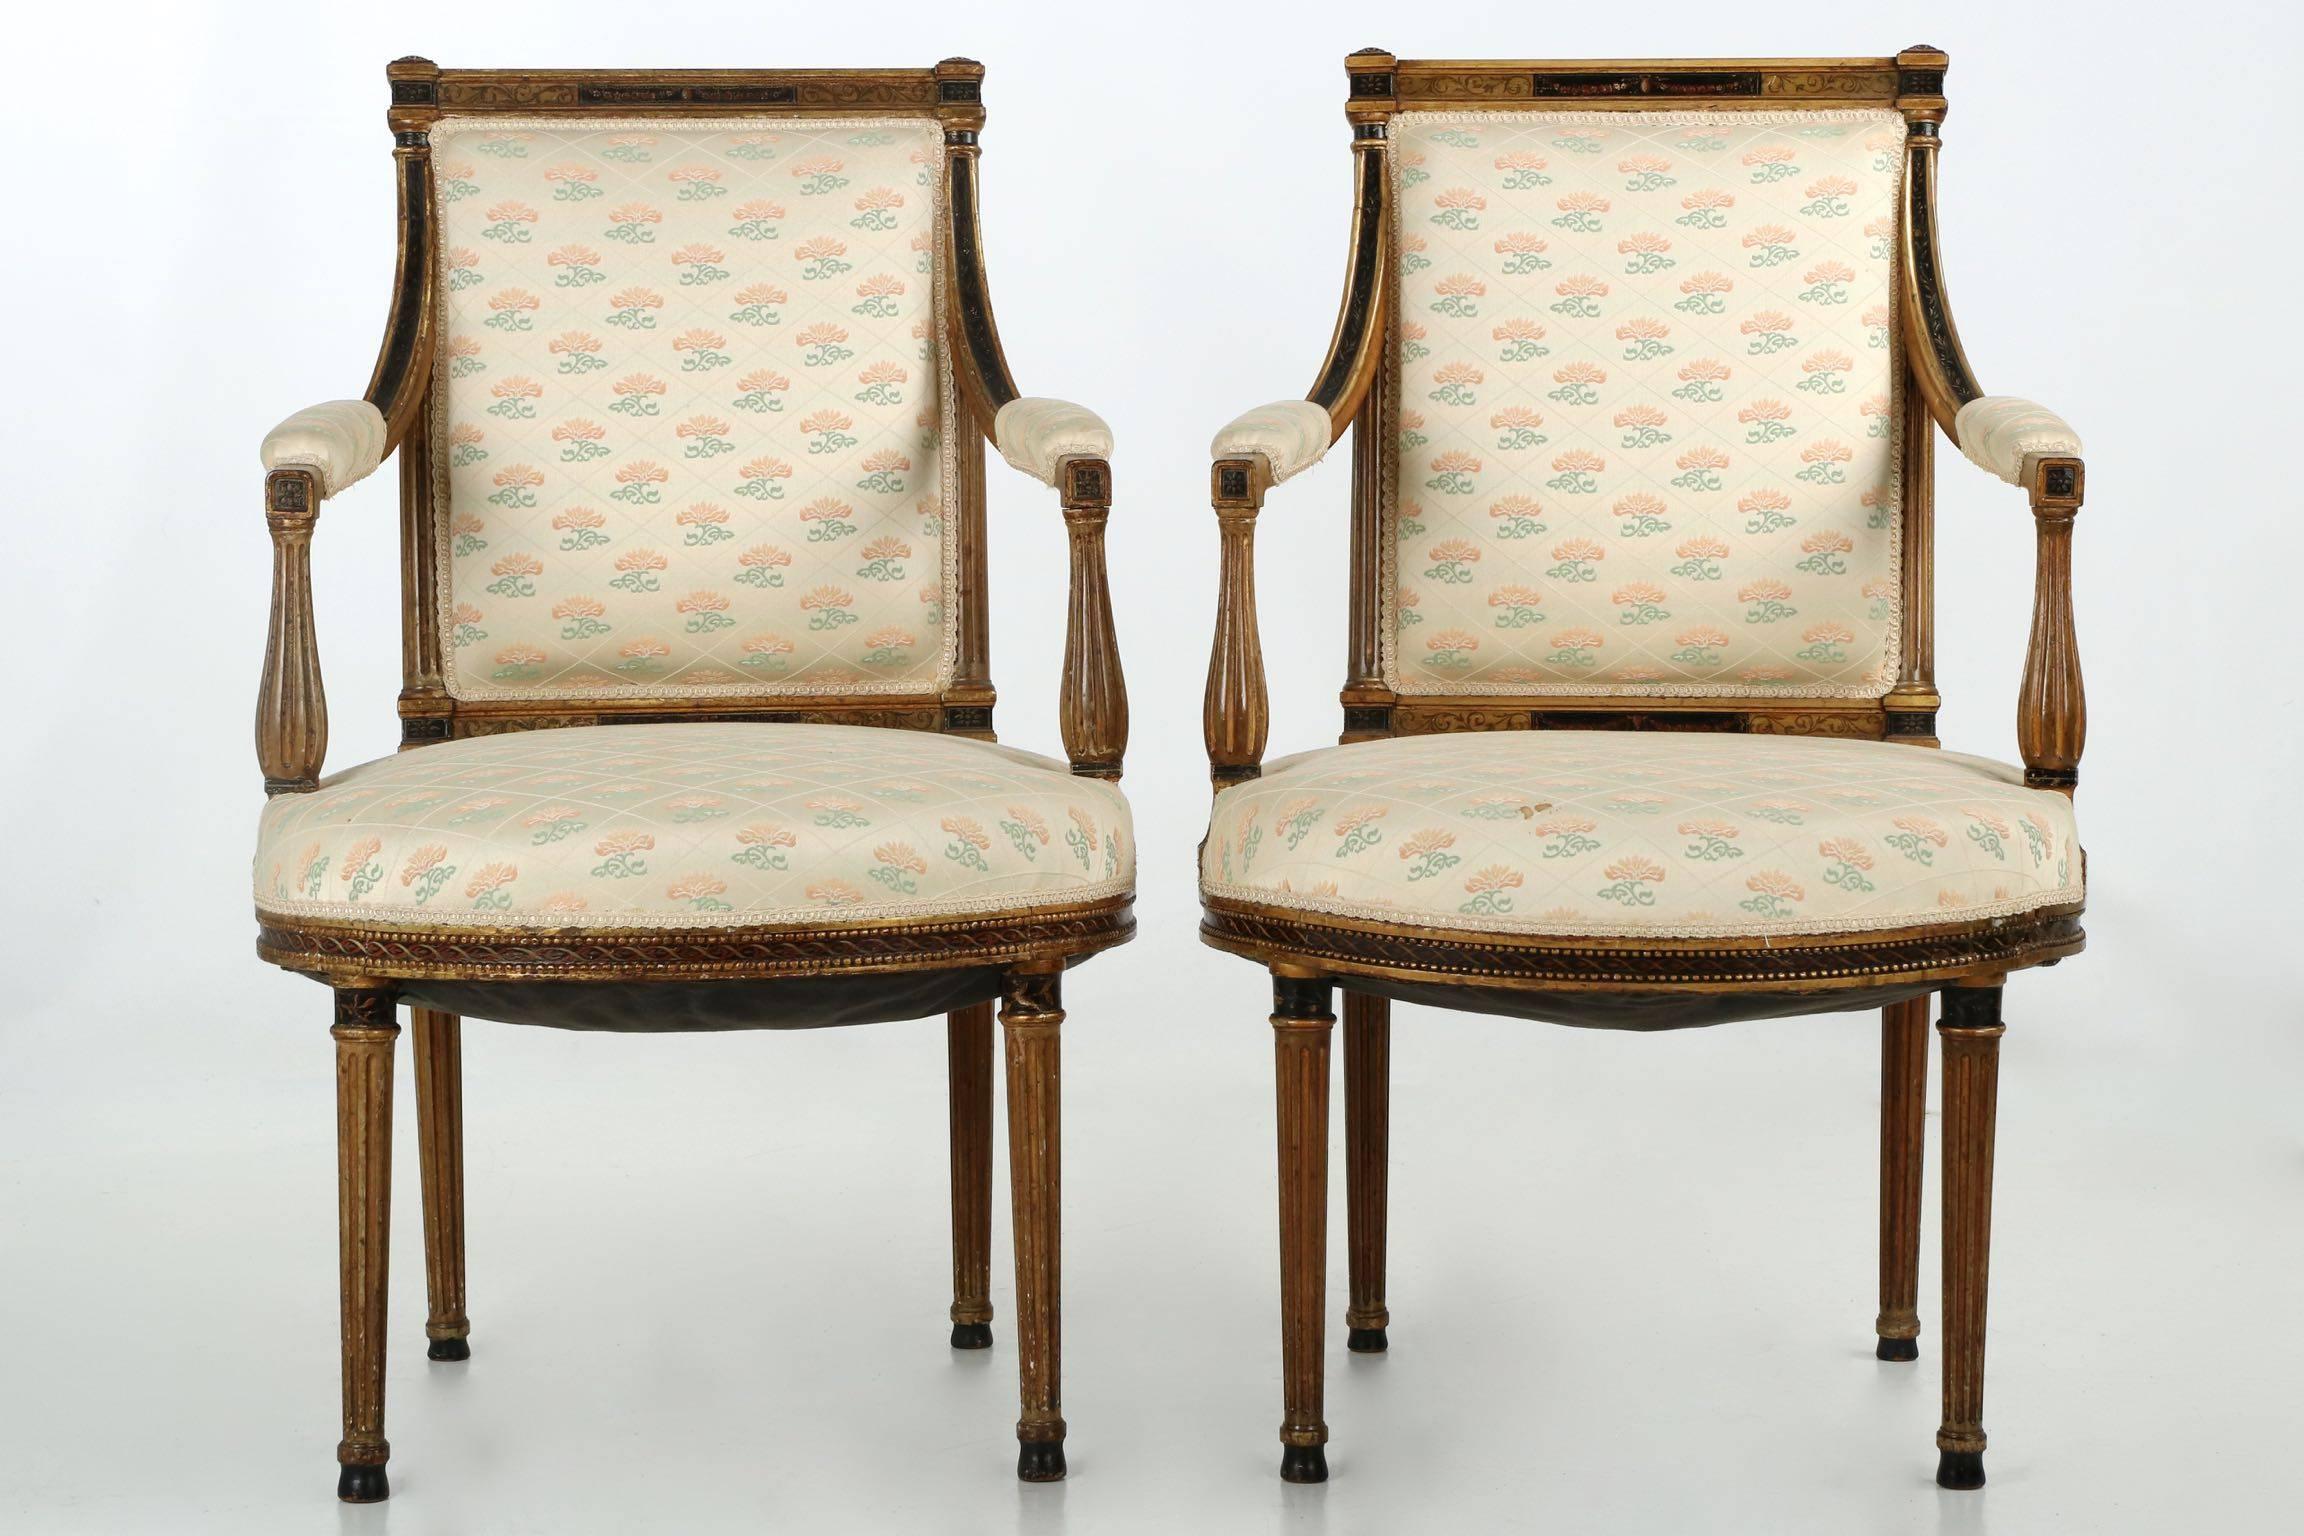 Ebonized French Neoclassical Salon Suite with Settee and Pair of Armchairs, 19th Century